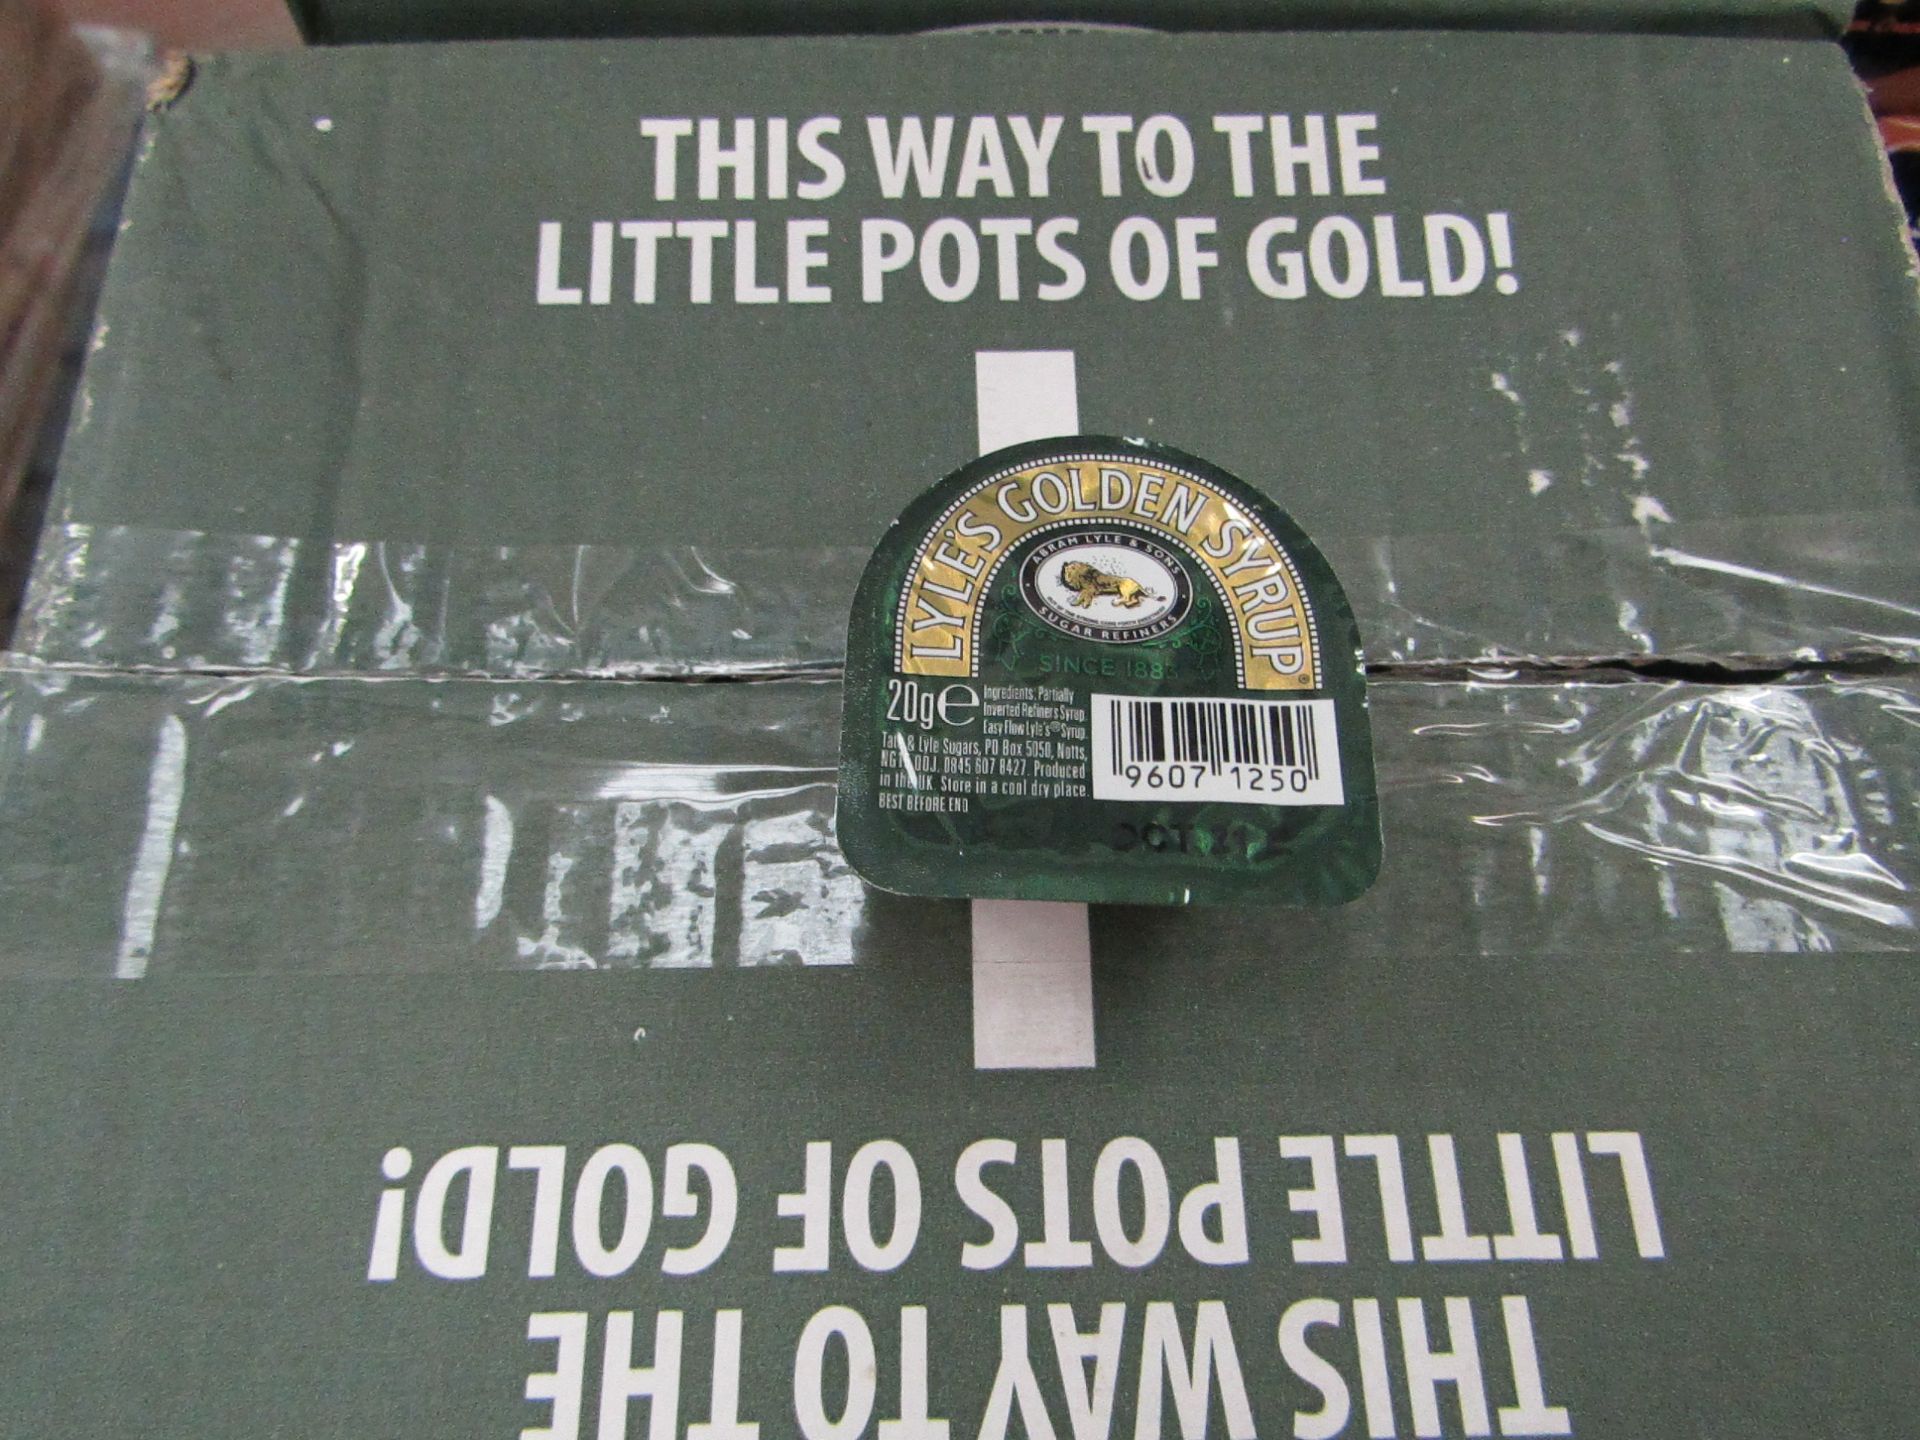 Box of 100x 20g Lyle's golden syrup - Unused & Boxed. BB 10/24